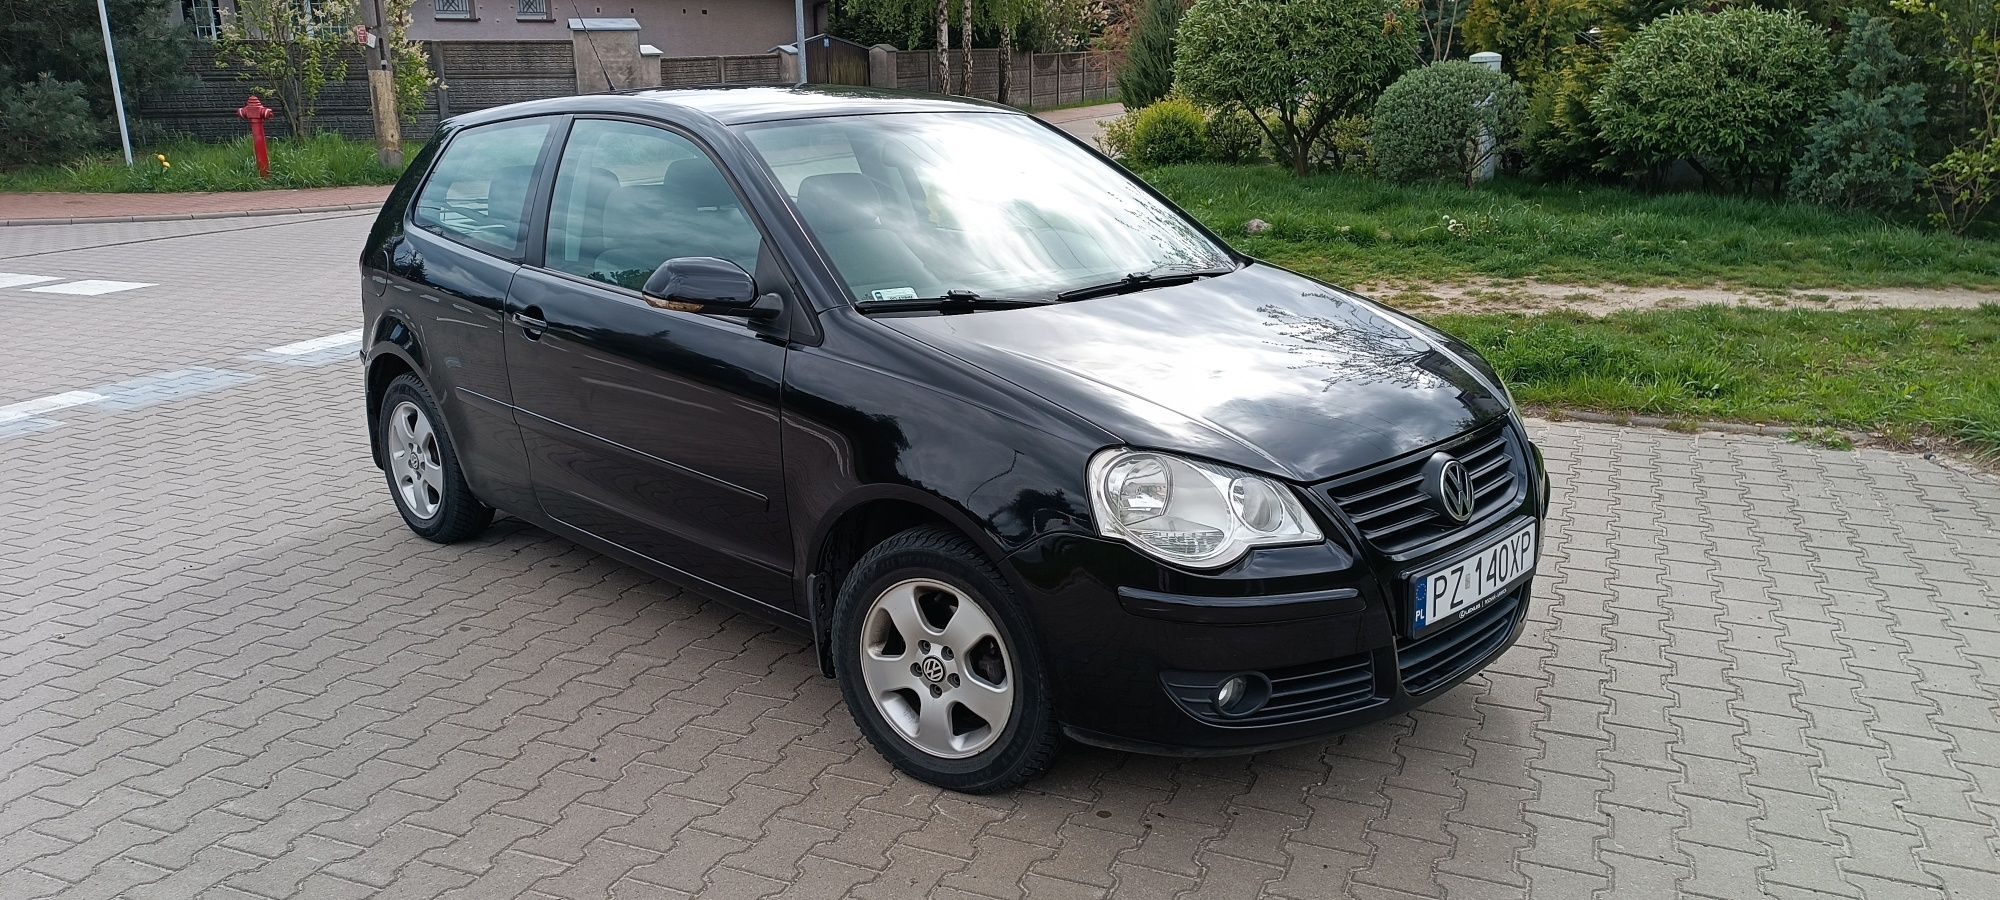 Volkswagen Polo 2008r.  1.2 benzyna